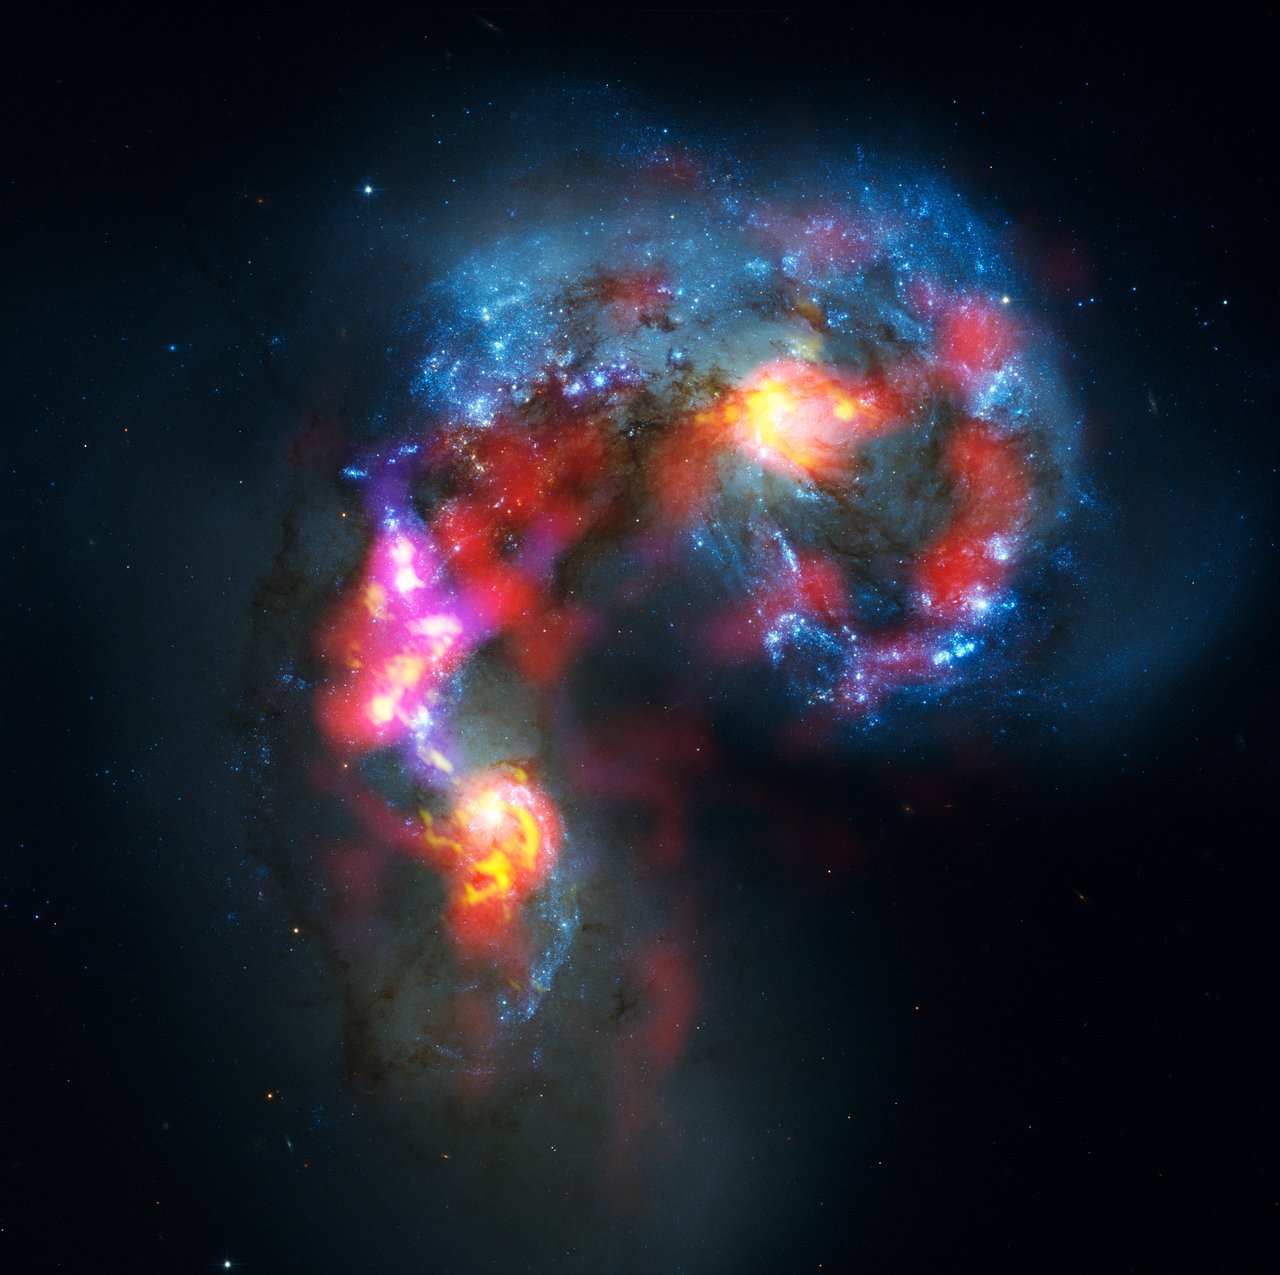 Galaxies Antennas in a composite image of Hubble and ALMA